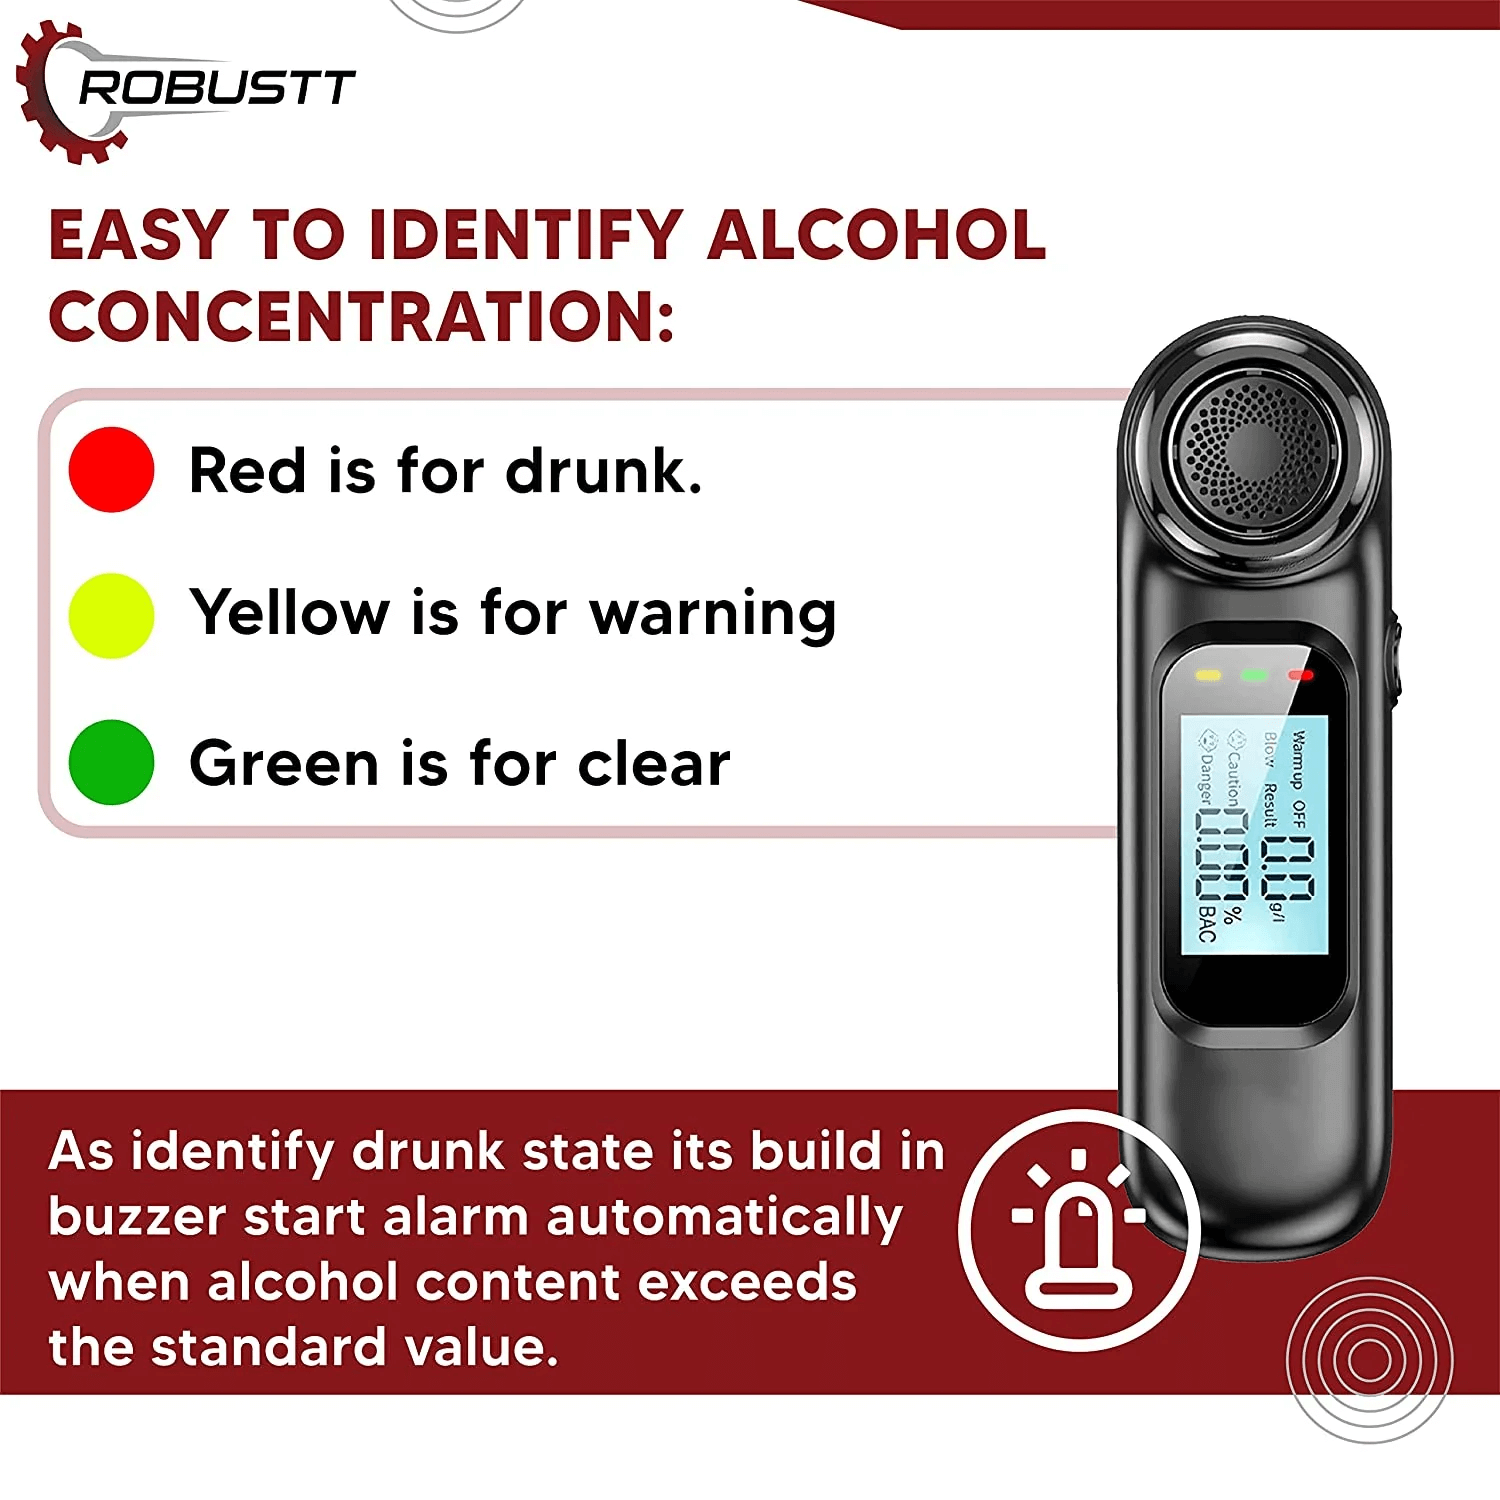 robustt-portable-alcohol-testing-machine-lcd-digital-display-breath-analyzer-alcohol-meter-for-personal-professional-use-no-mouth-touch-alcohol-tester-model-3